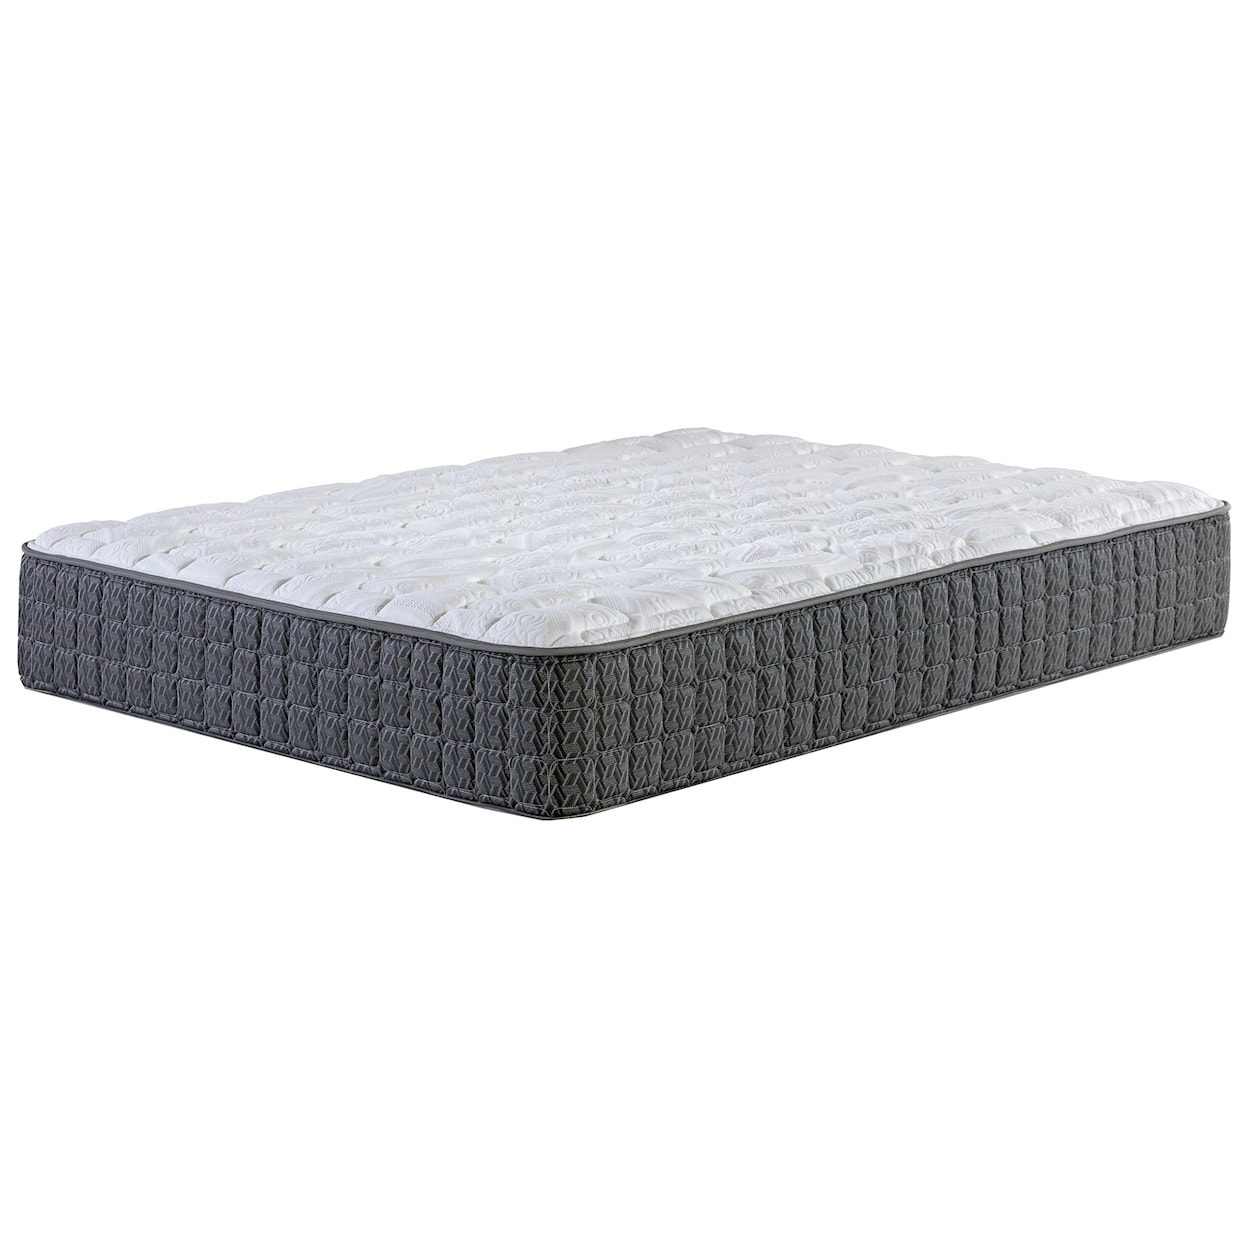 Corsicana Hallandale Firm Twin Firm Two Sided Mattress